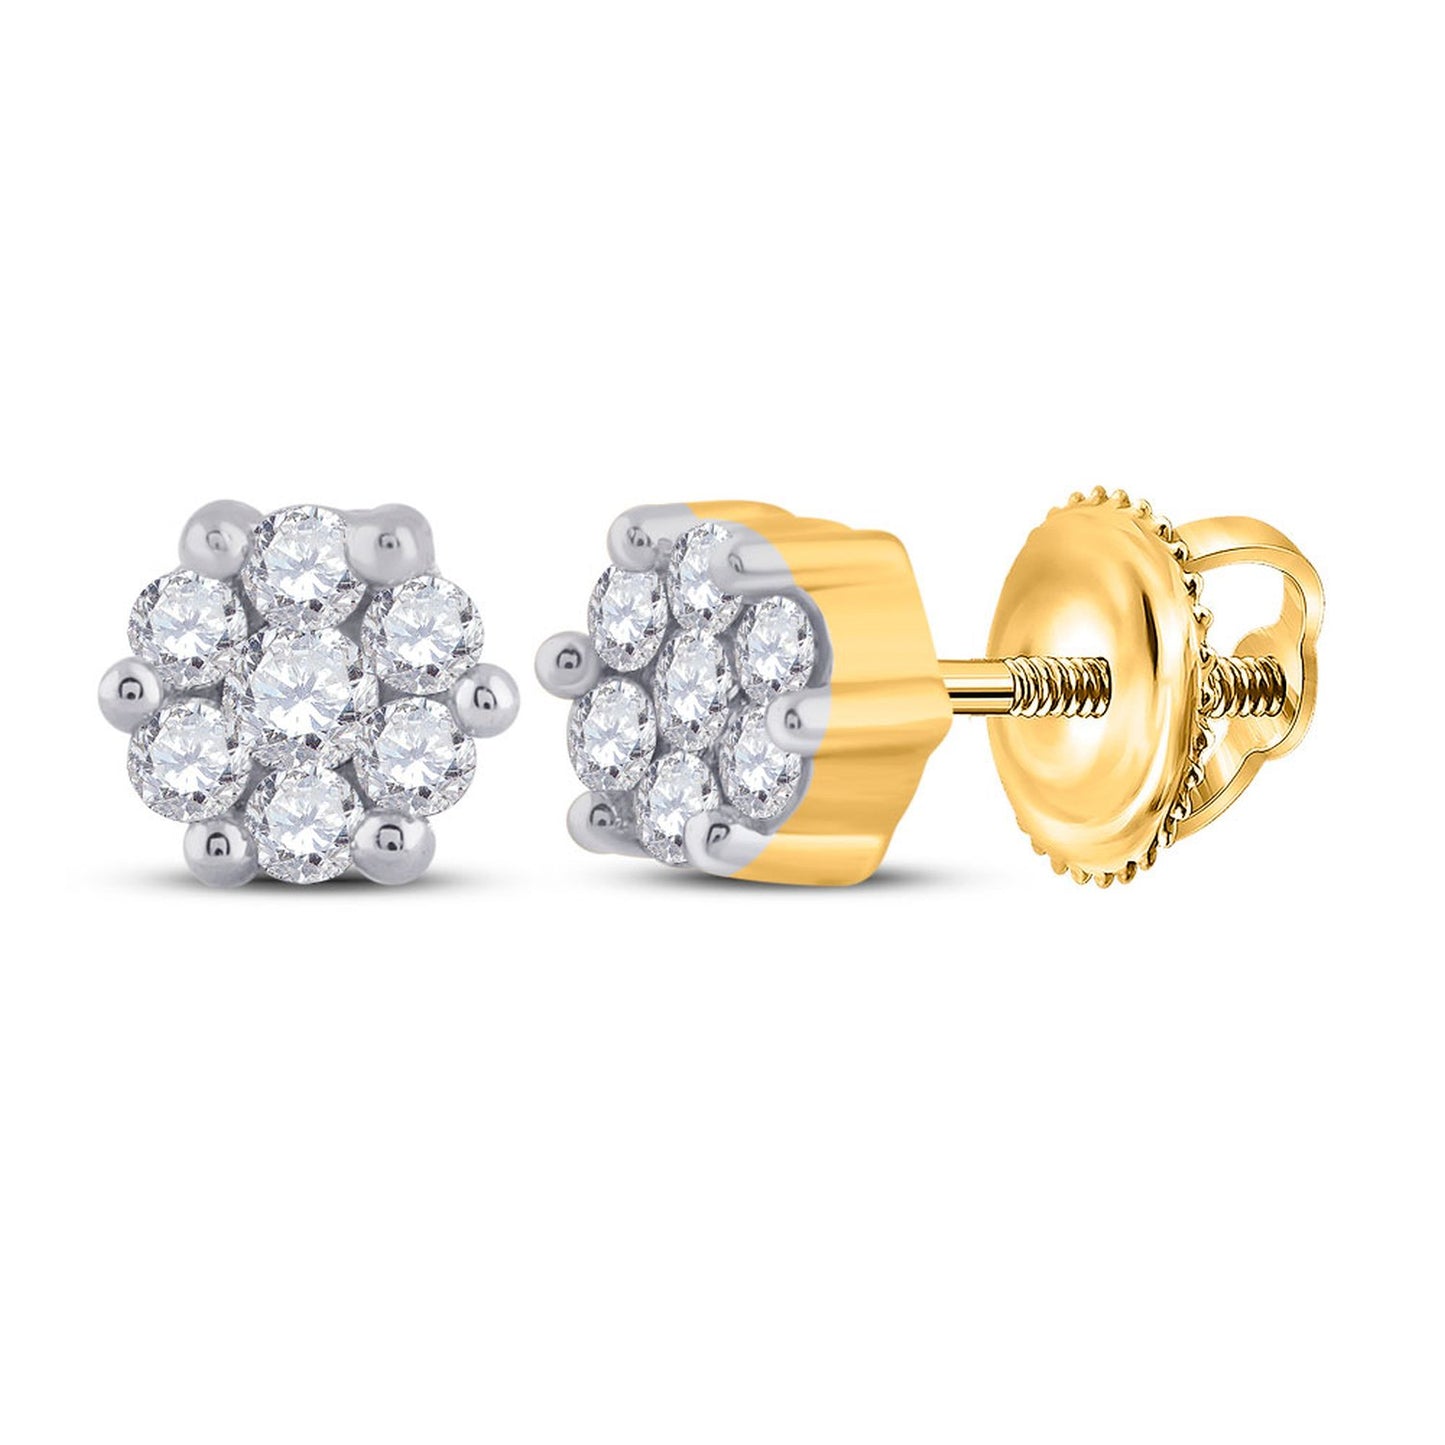 GND 10kt Yellow Gold Womens Round Diamond Flower Cluster Earrings 1/6 Cttw